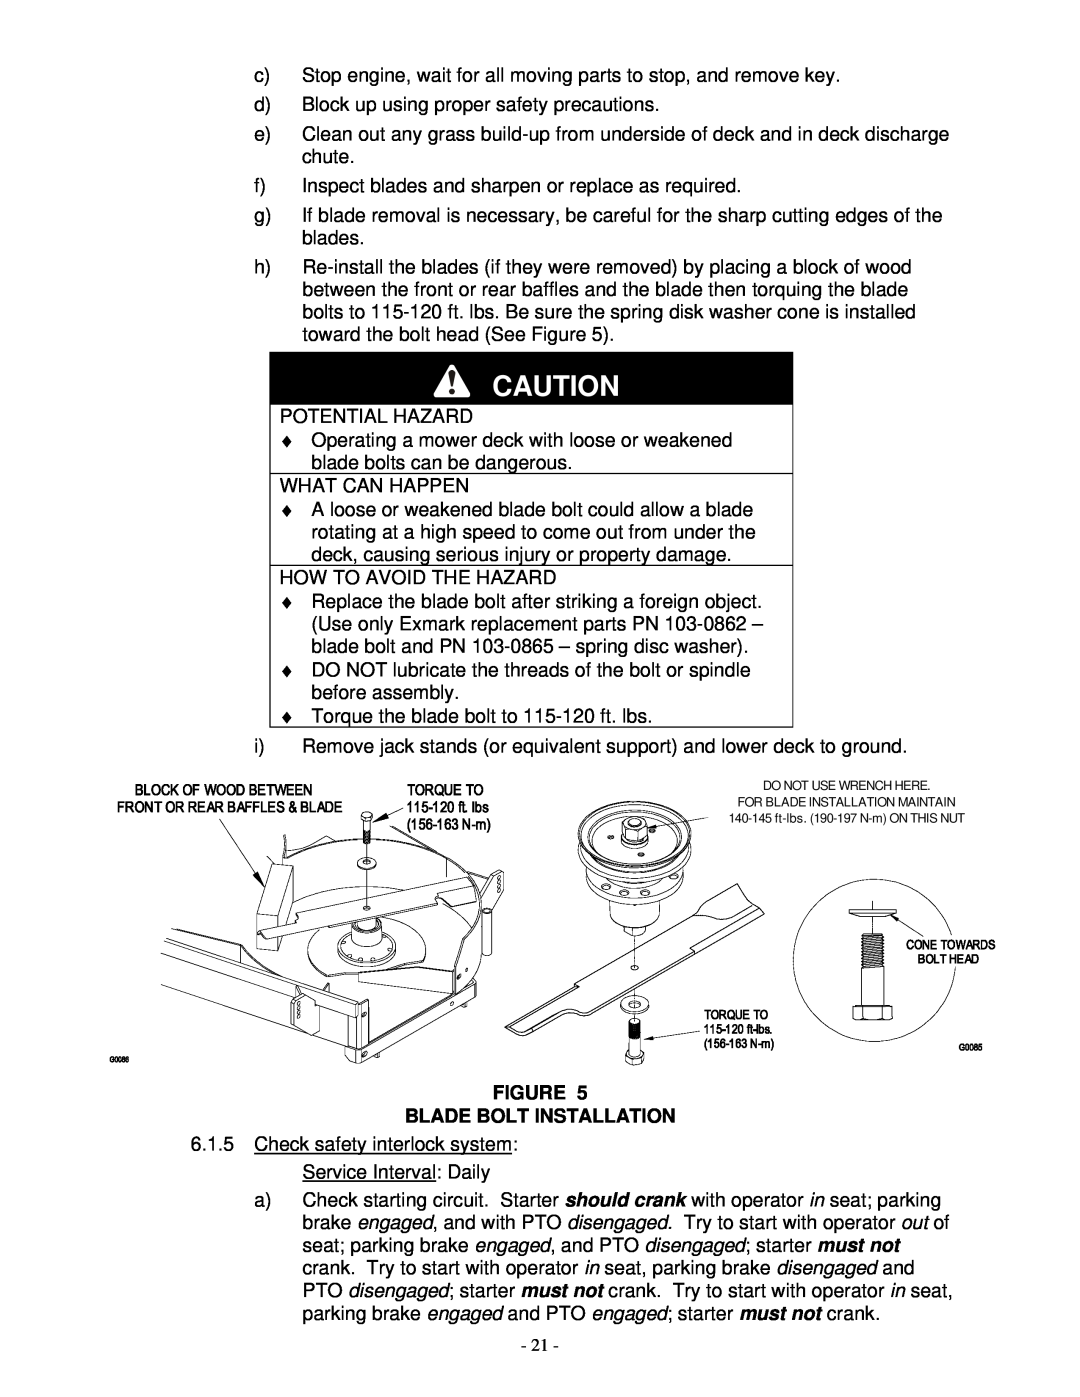 Exmark FMD 524, FMD 604 manual Blade Bolt Installation, Do Not Use Wrench Here 